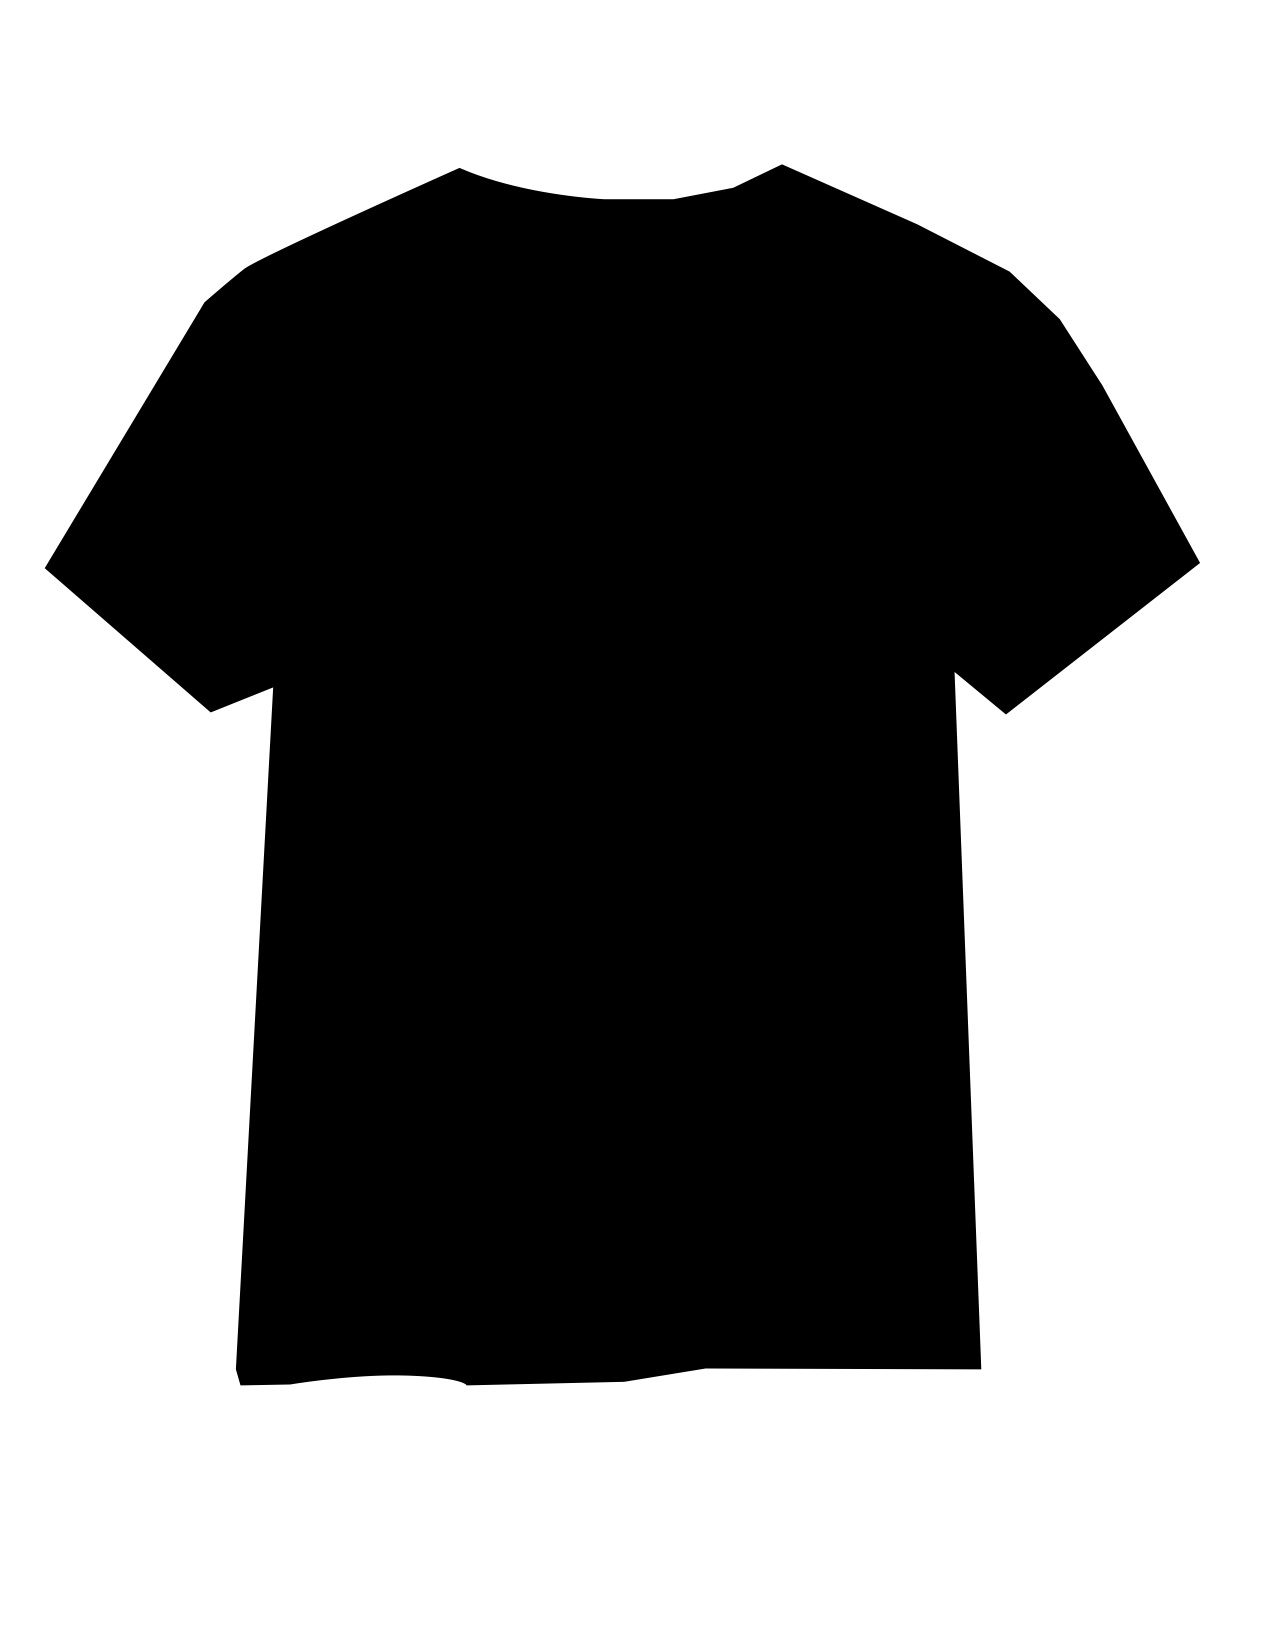 Black T Shirt Front And Back Template